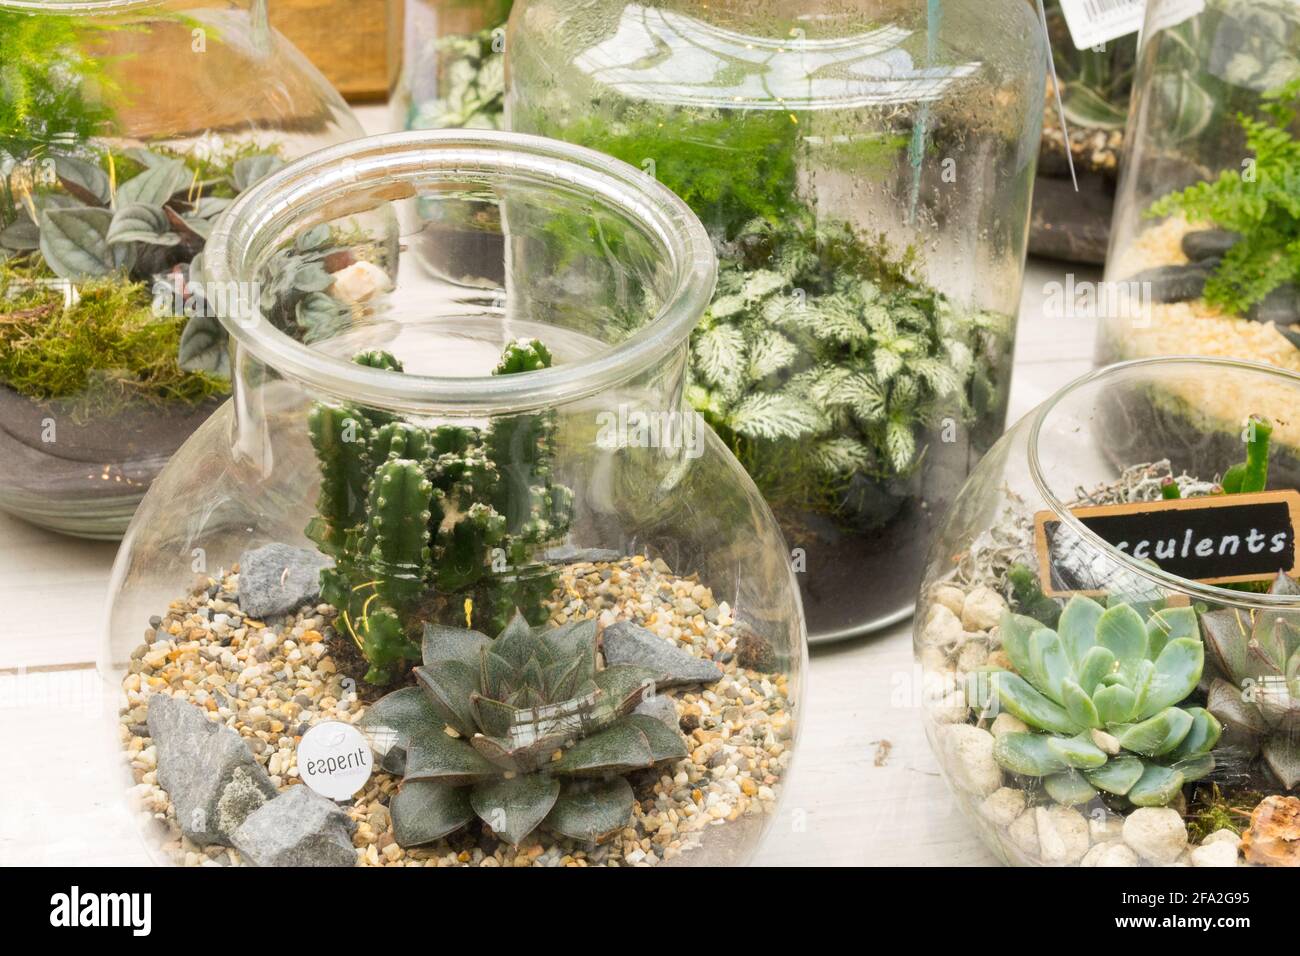 Succulents growing in a glass jars in garden centre Stock Photo